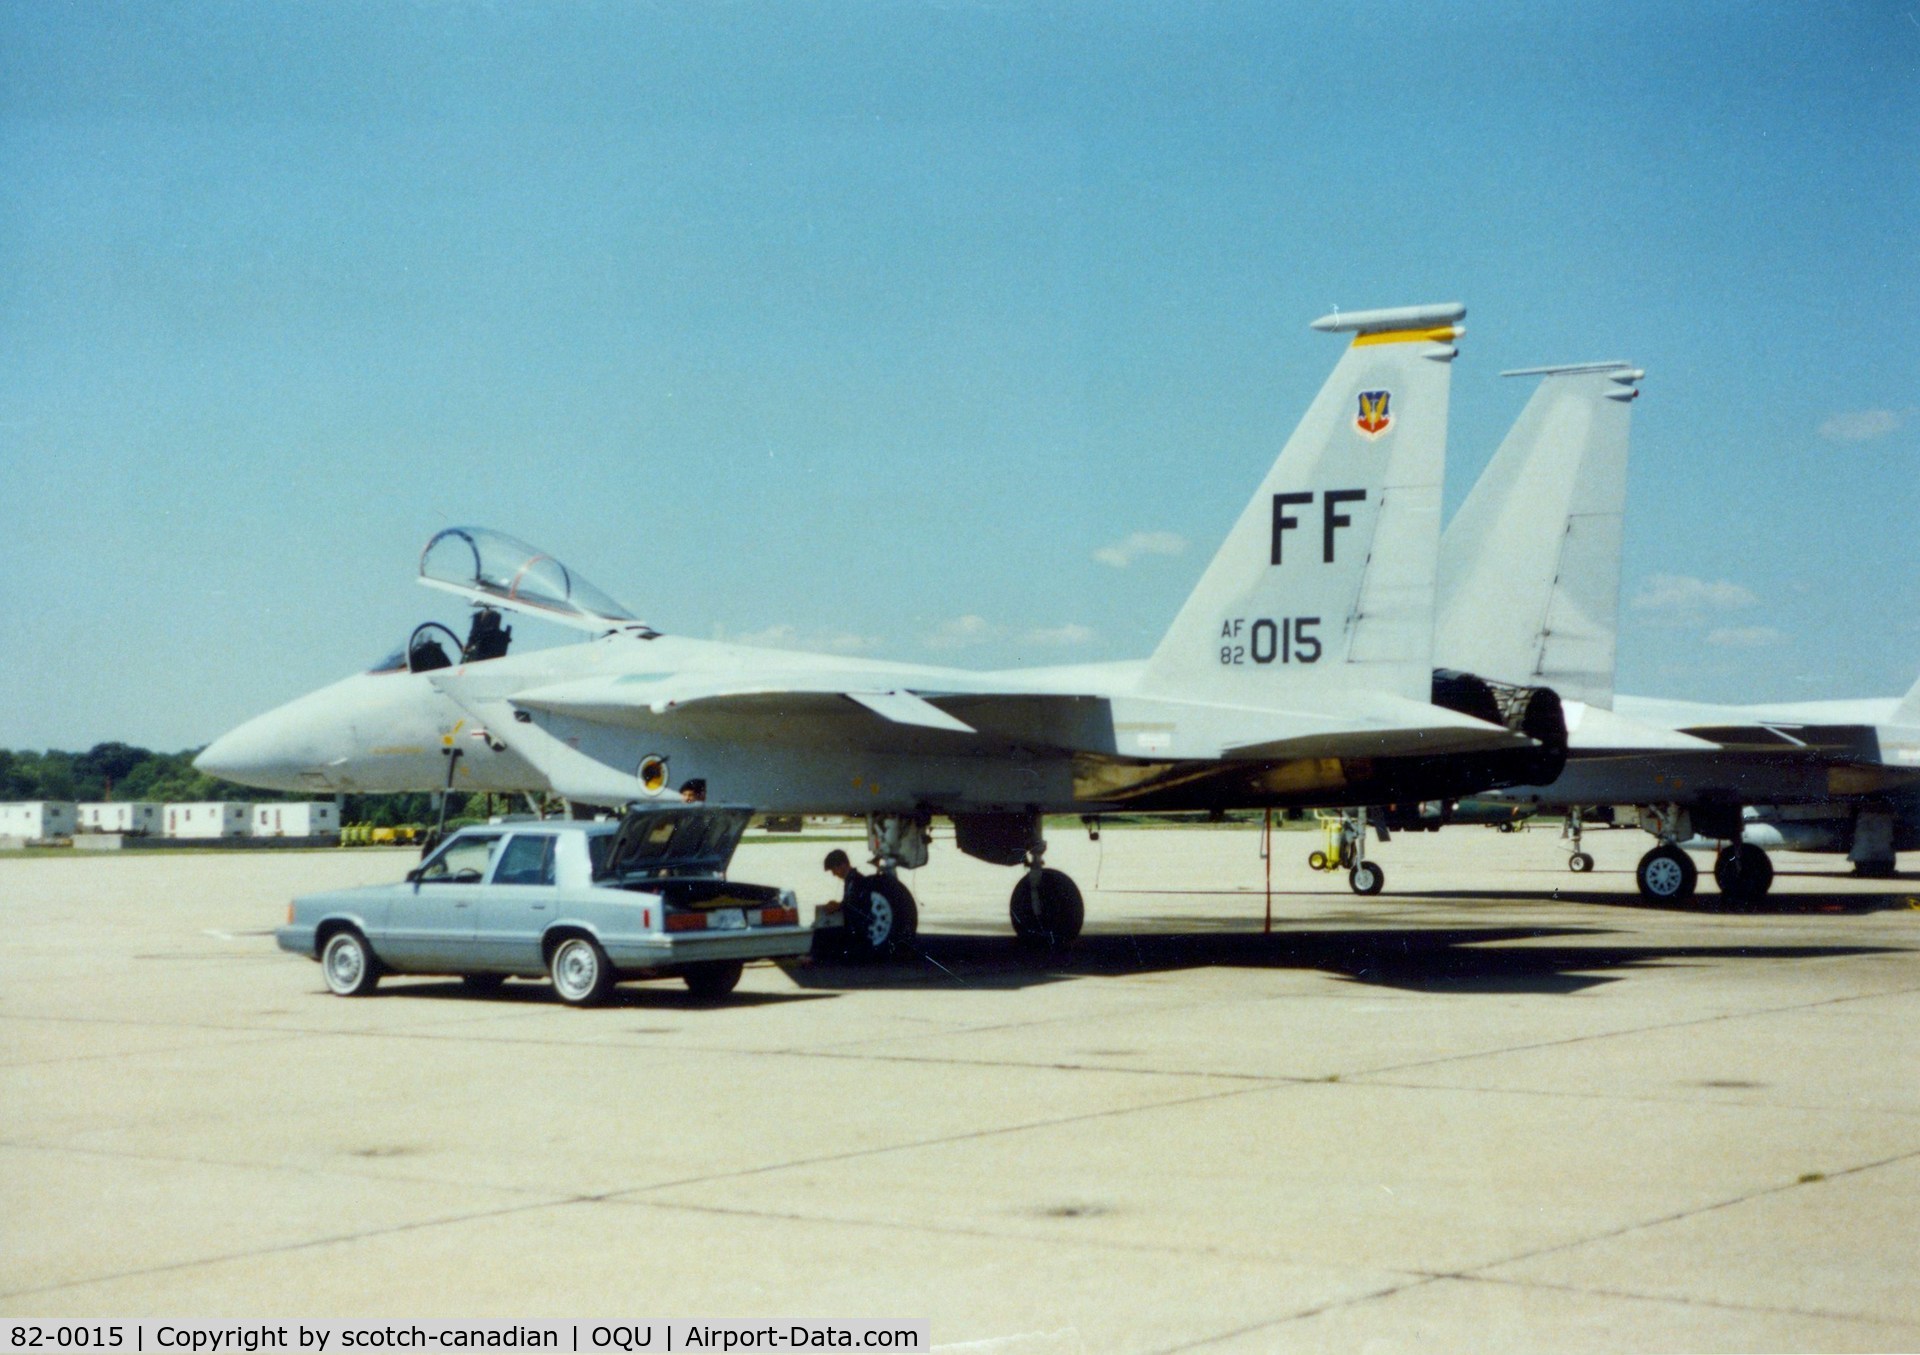 82-0015, 1982 McDonnell Douglas F-15C Eagle C/N 0828/C246, 1982 McDonnell Douglas F-15C S/N 82-0015 at Quonset State Airport, North Kingstown, RI - circa 1980's